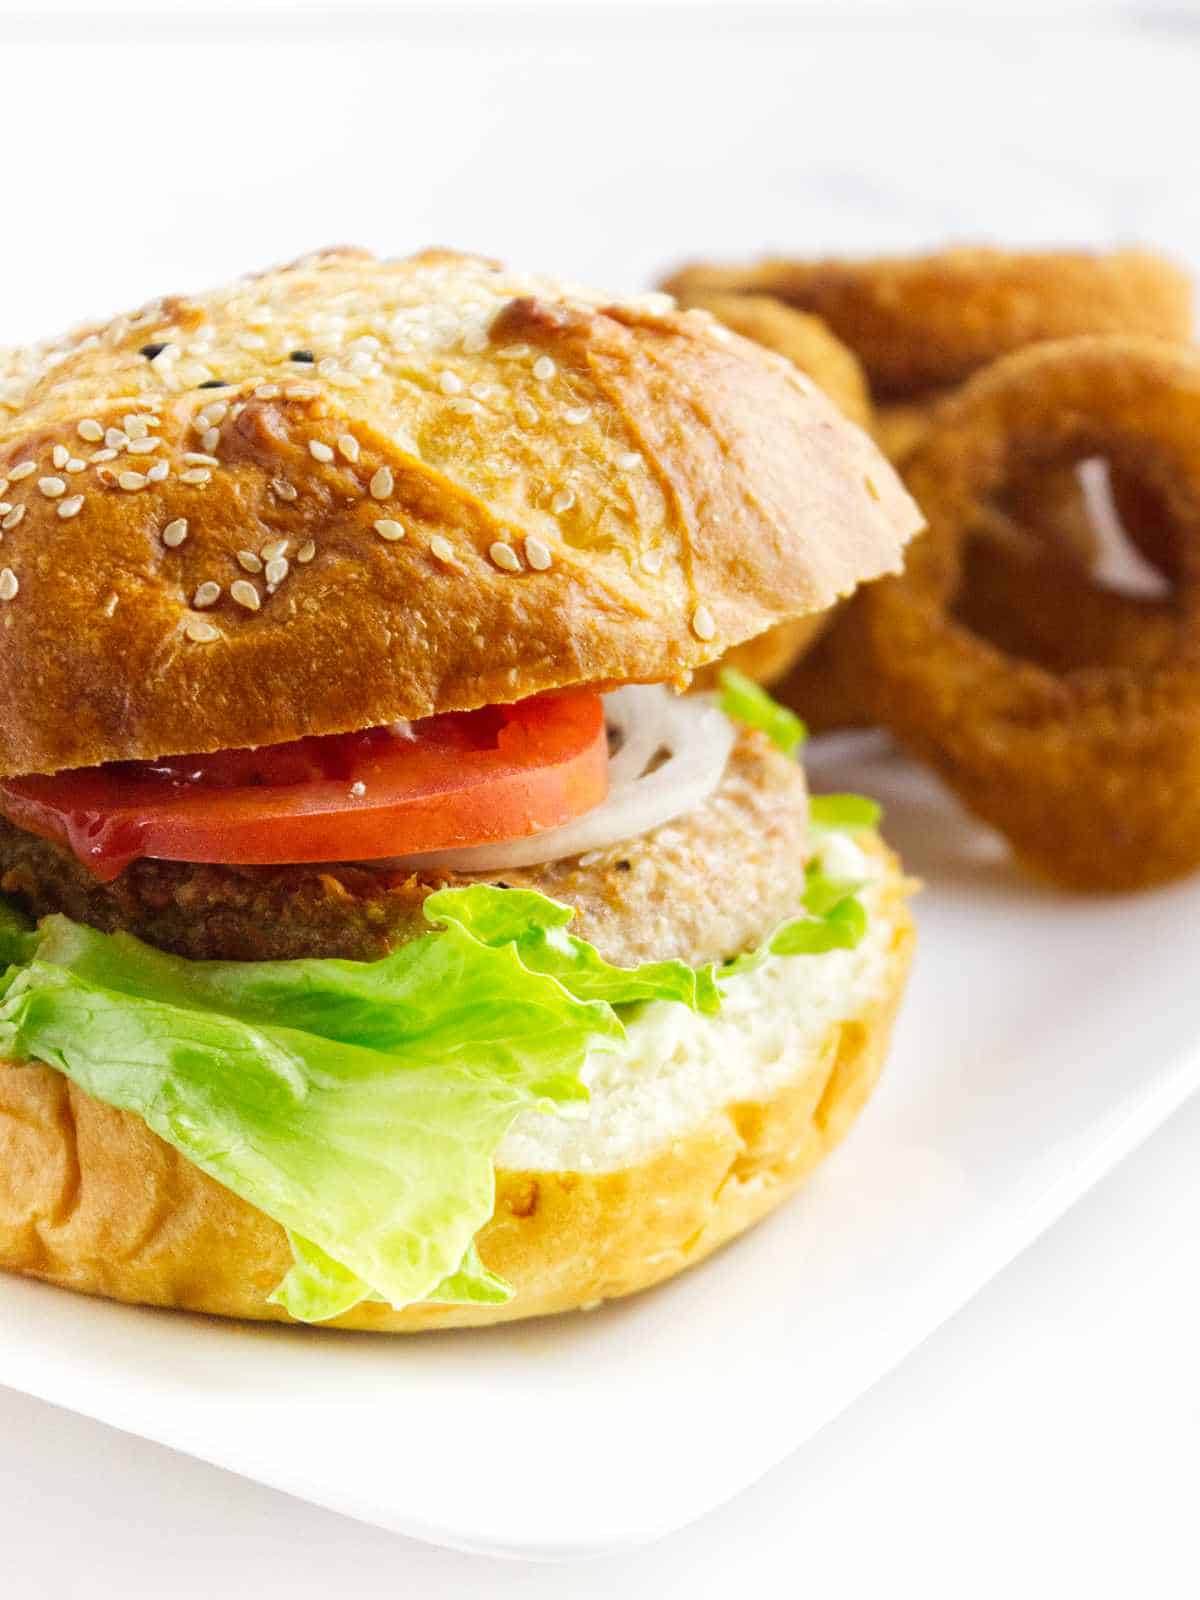 turkey burger on a bun with slices of tomato, onion, and lettuce with onion rings nearby.